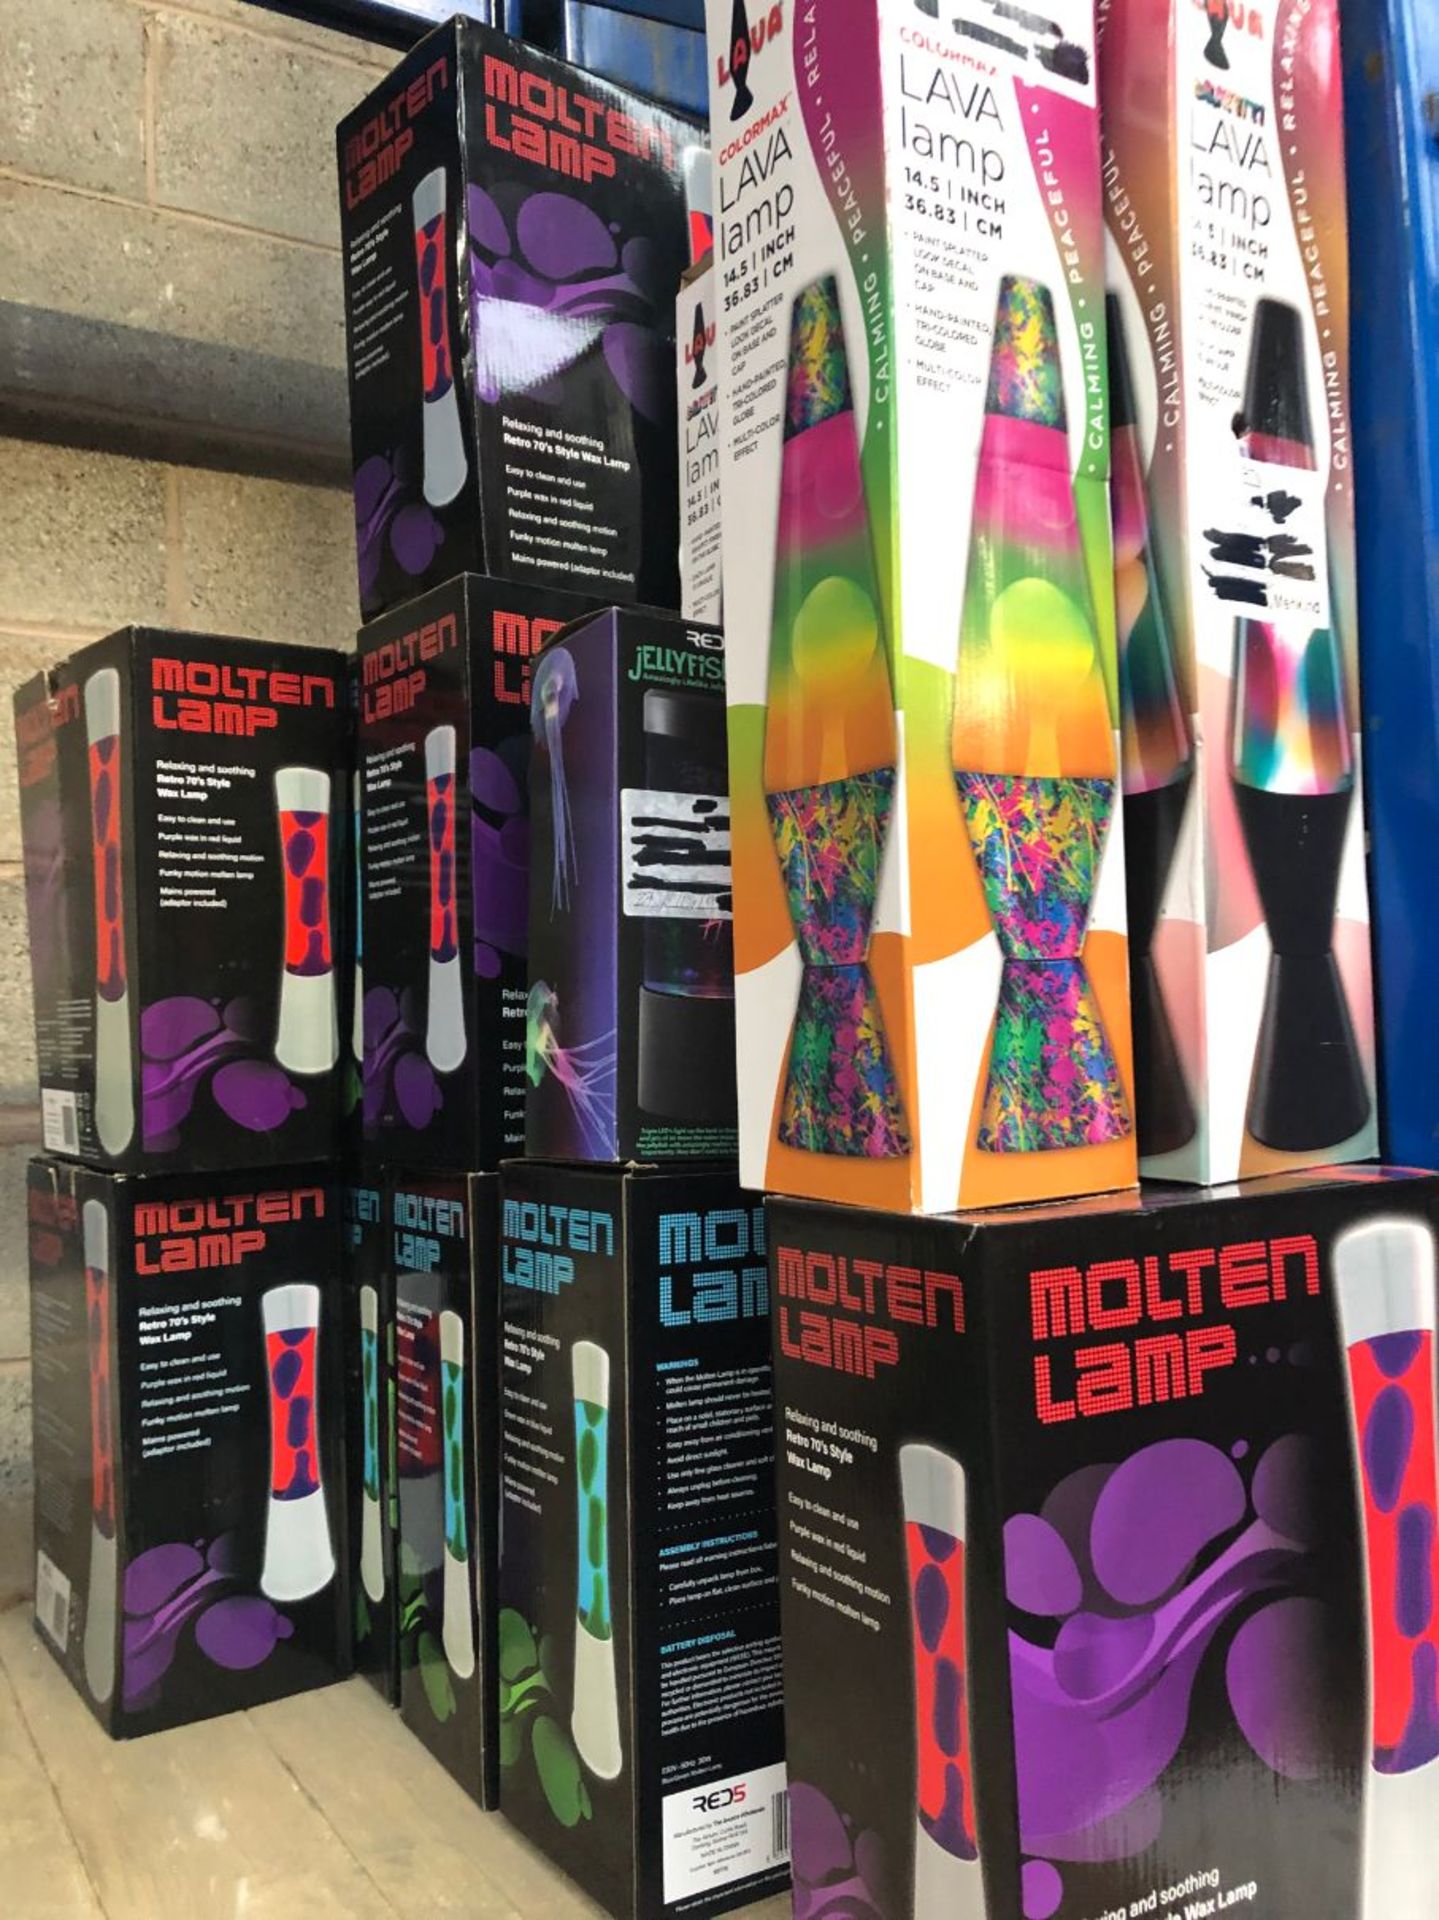 14 X ASSORTED LAVA LAMPS / 9 X MOLTEN LAVA LAMPS, 5 X LAVA LAMPS / COMBINED RRP £252.00 / UNTESTED